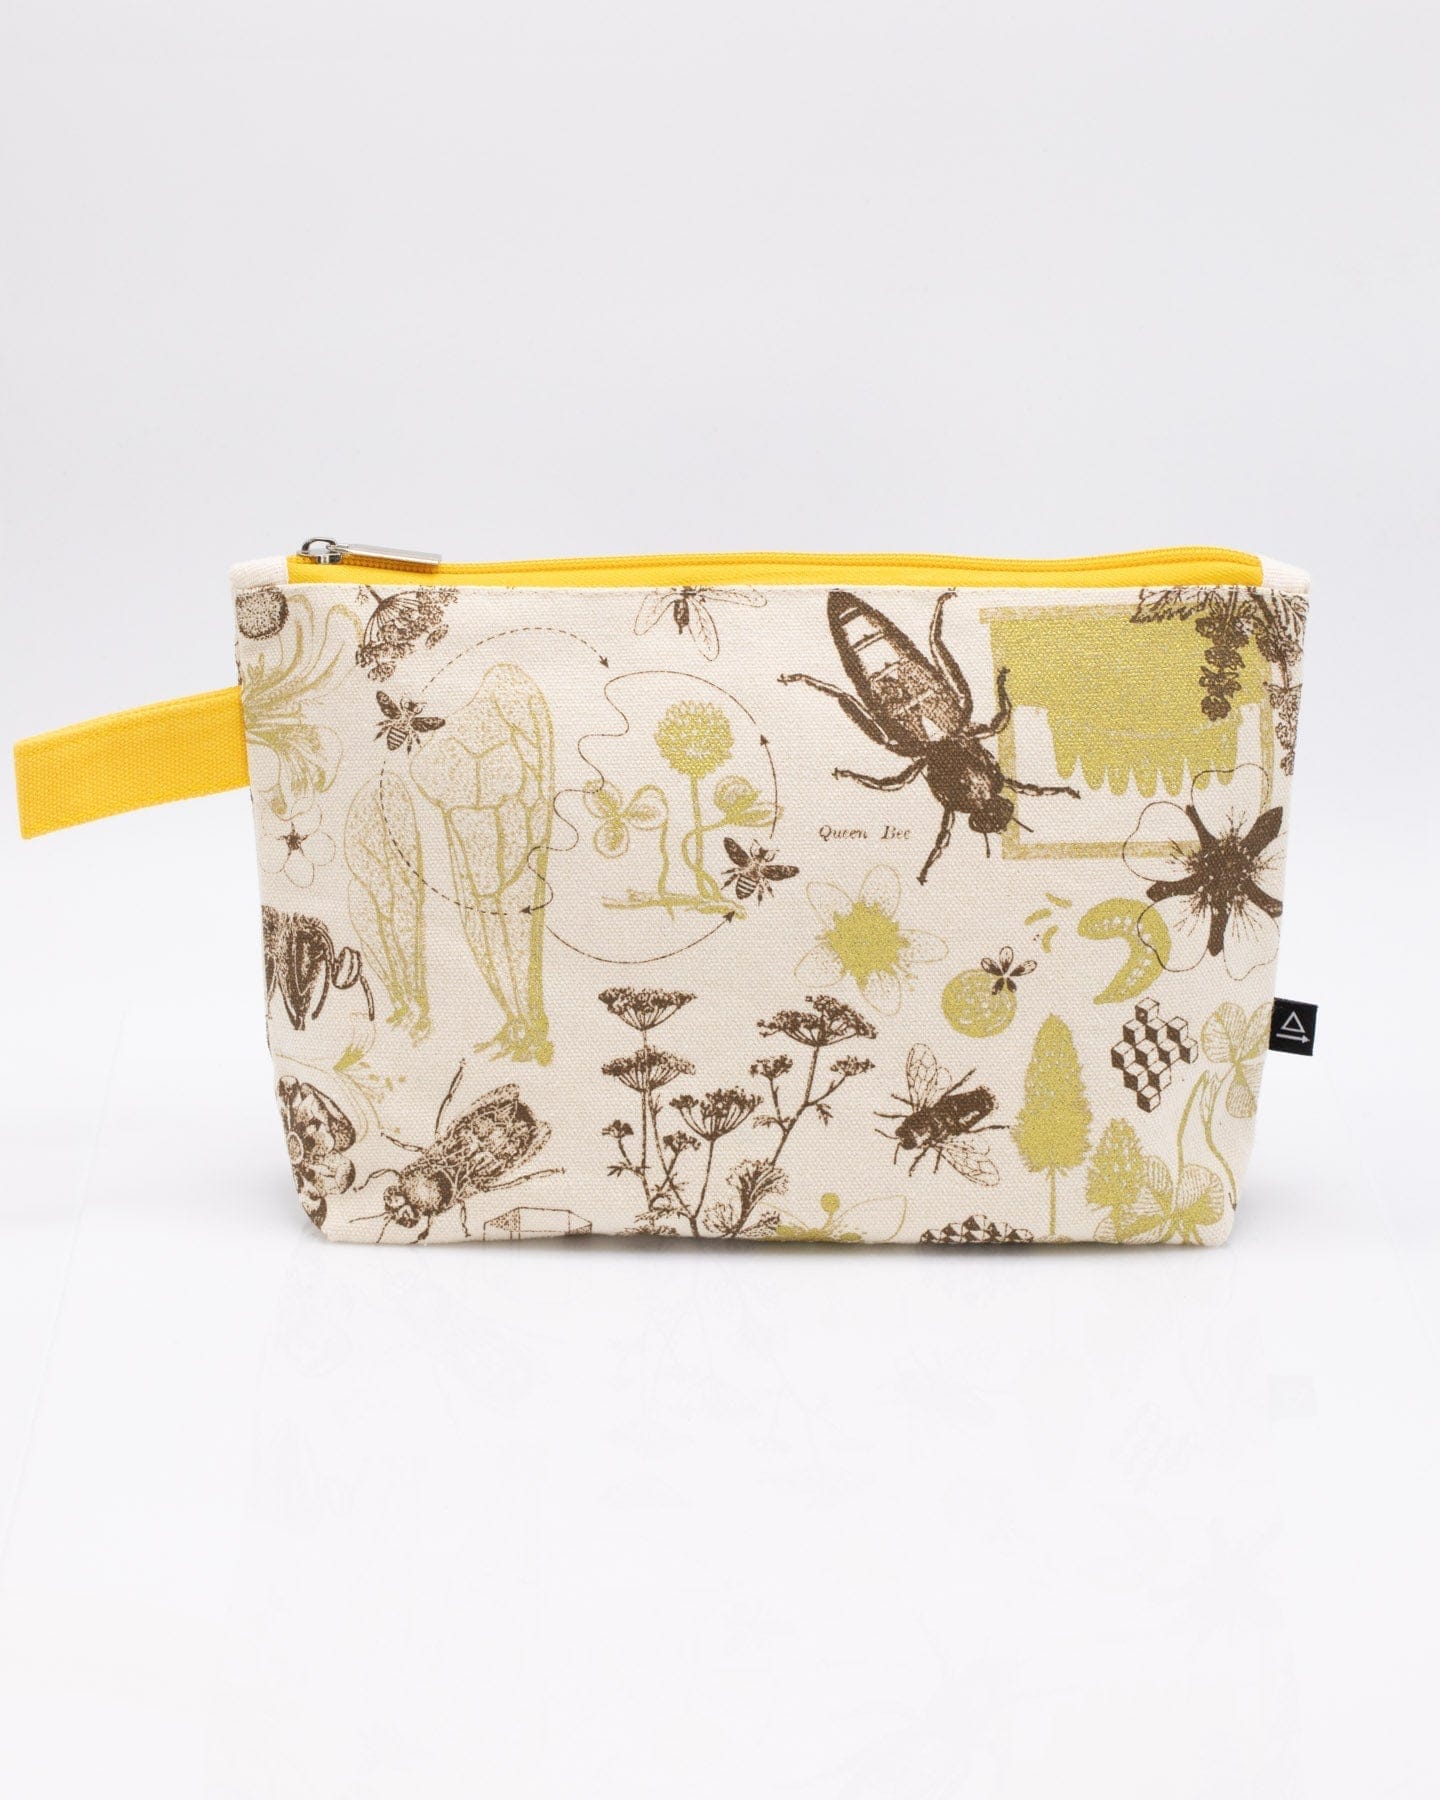 Bee Print Zipped Pencil Case Large Fabric Pencil Case 